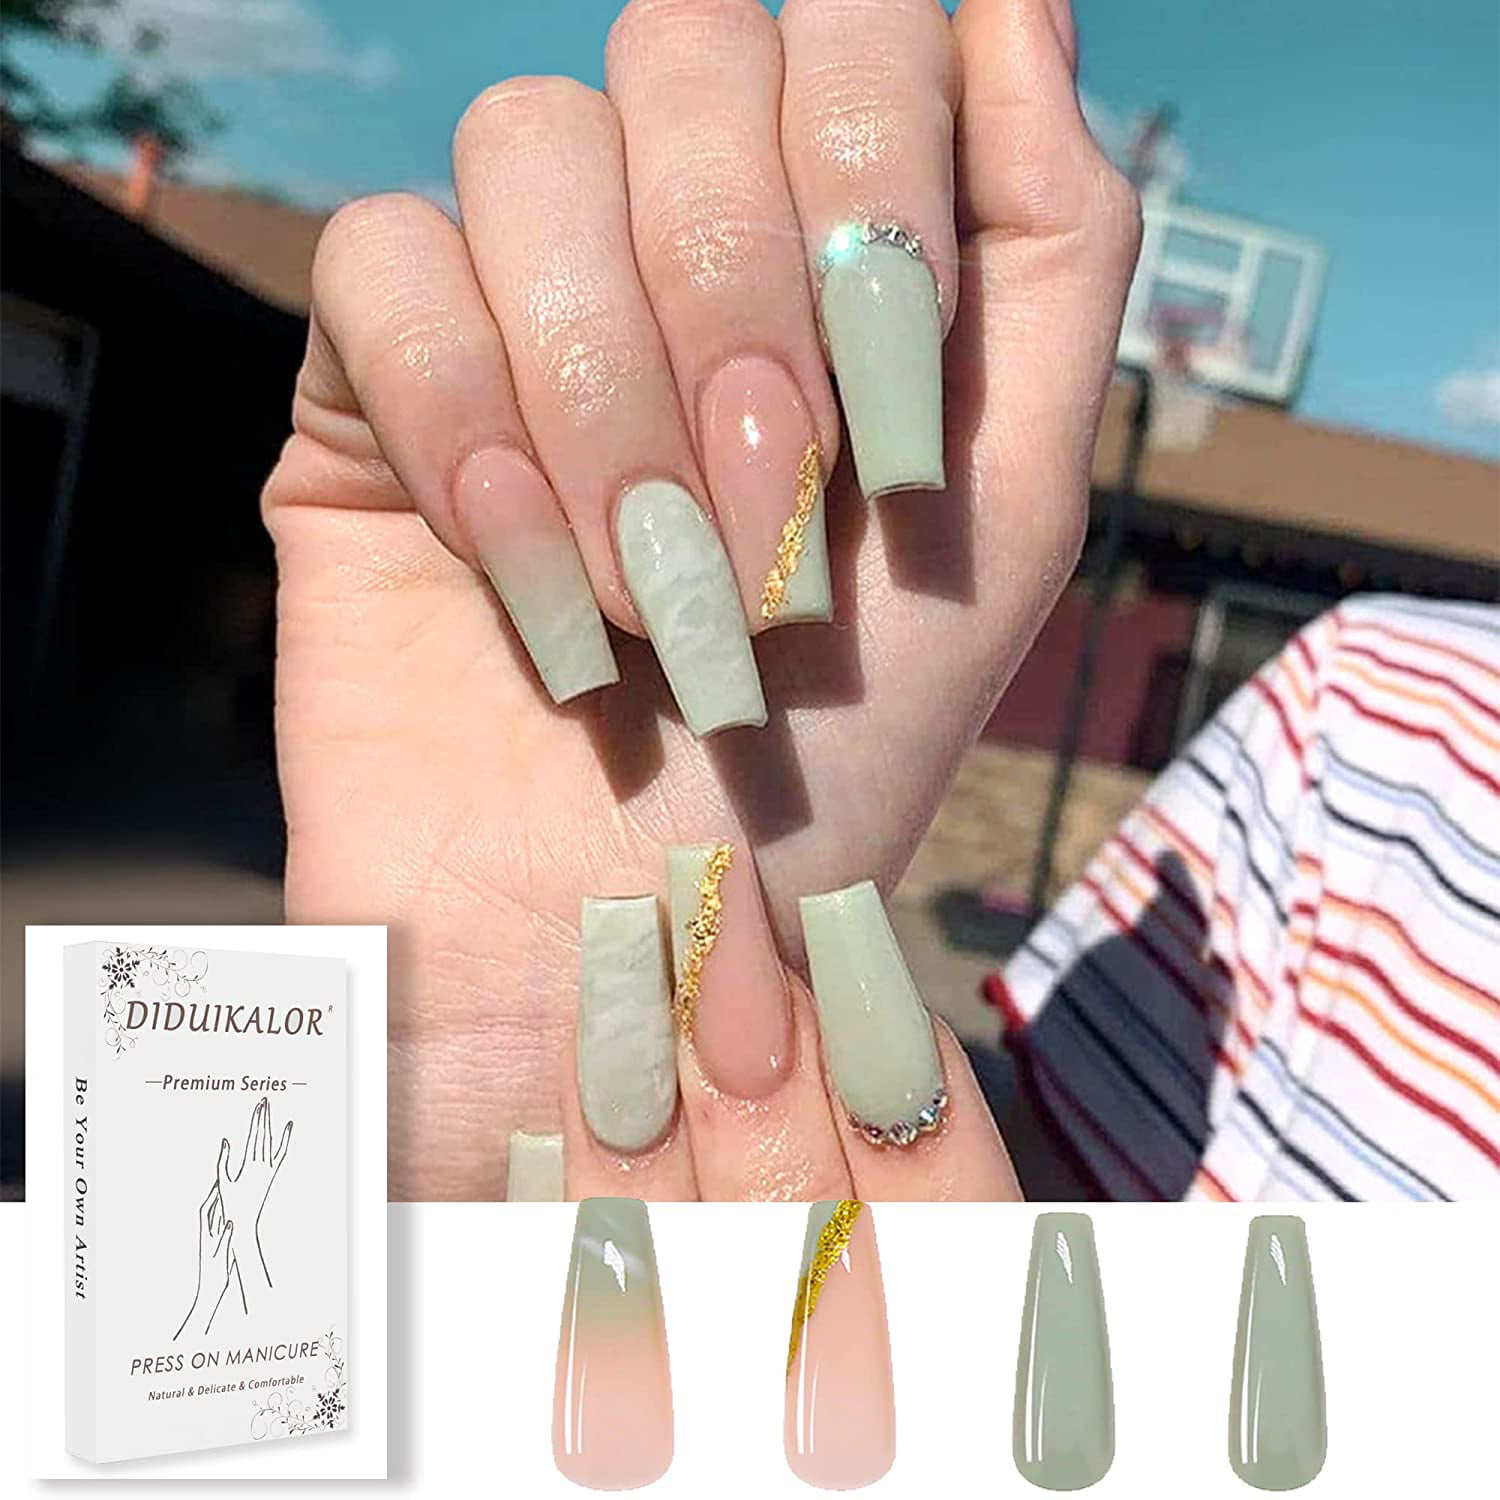 Press On Nails Green Coffin Glitter Rhinestone False Nails for Women Girls  with Nail Glue and Jelly Gel, Green Long Coffin Acrylic Fake Nails Luxury  Charms Trendy Uñas Acrilicas con Diseños Decoradas -